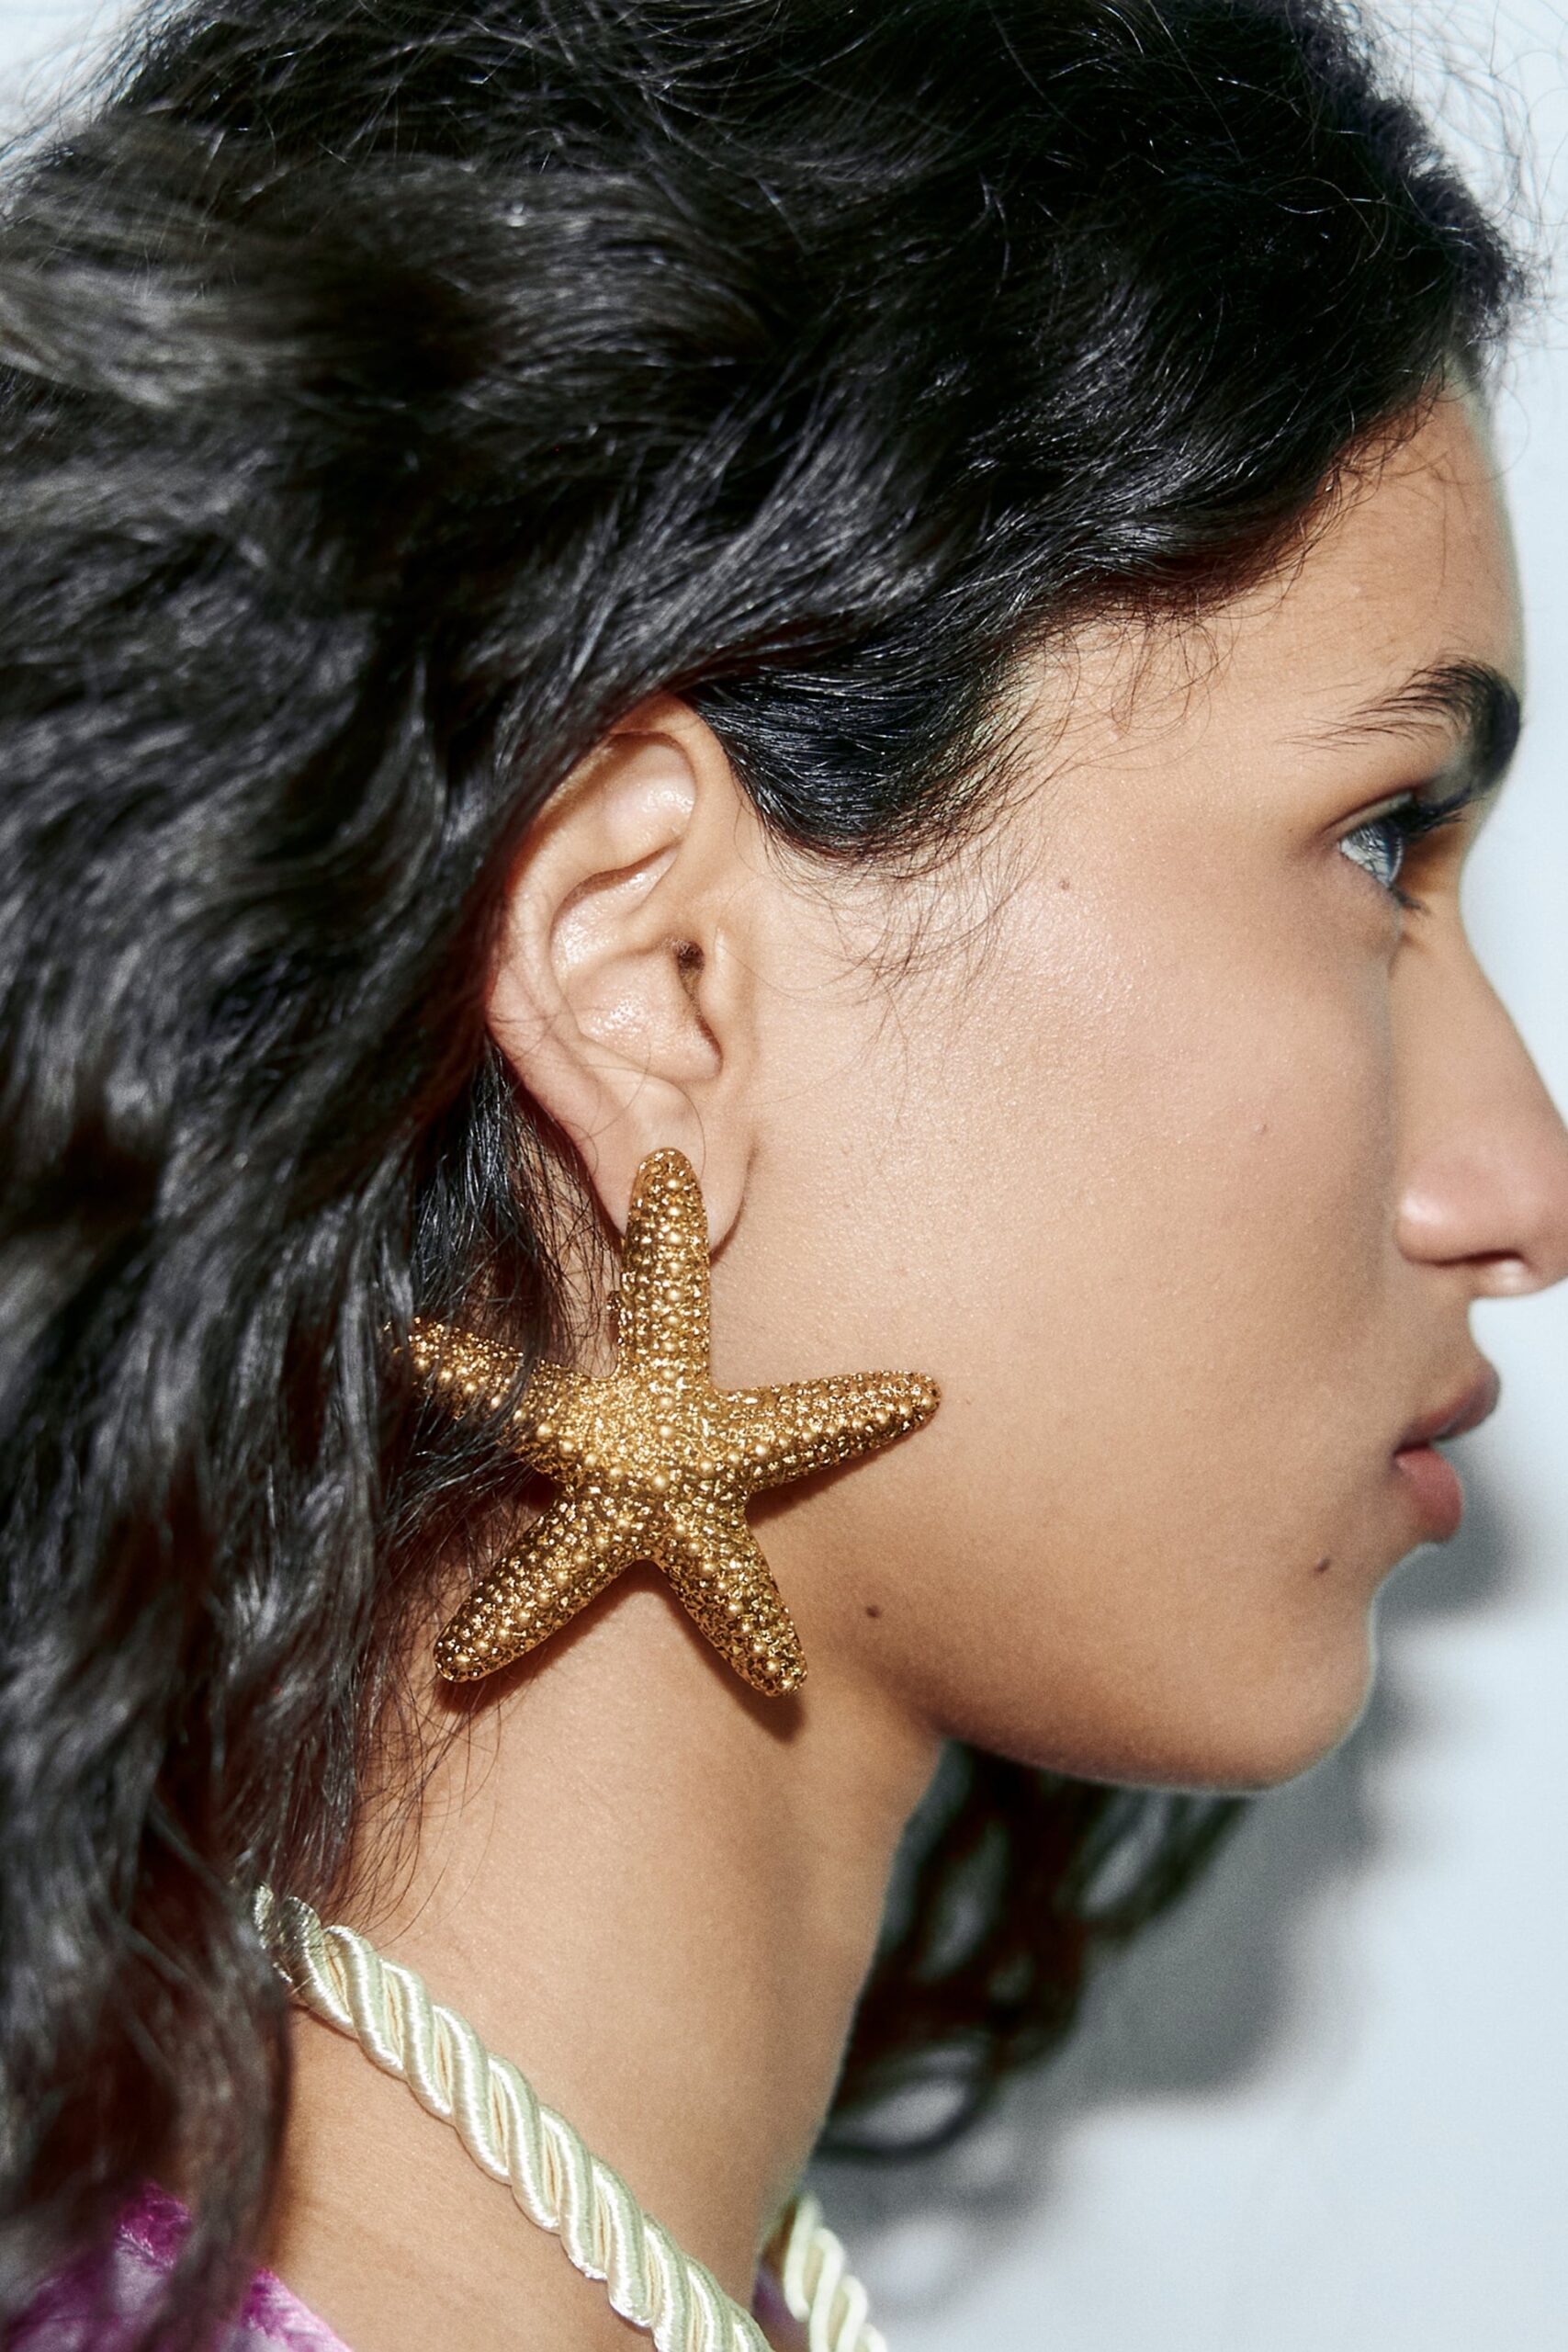 close-up image of a woman's profile. she is wearing large starfish earrings